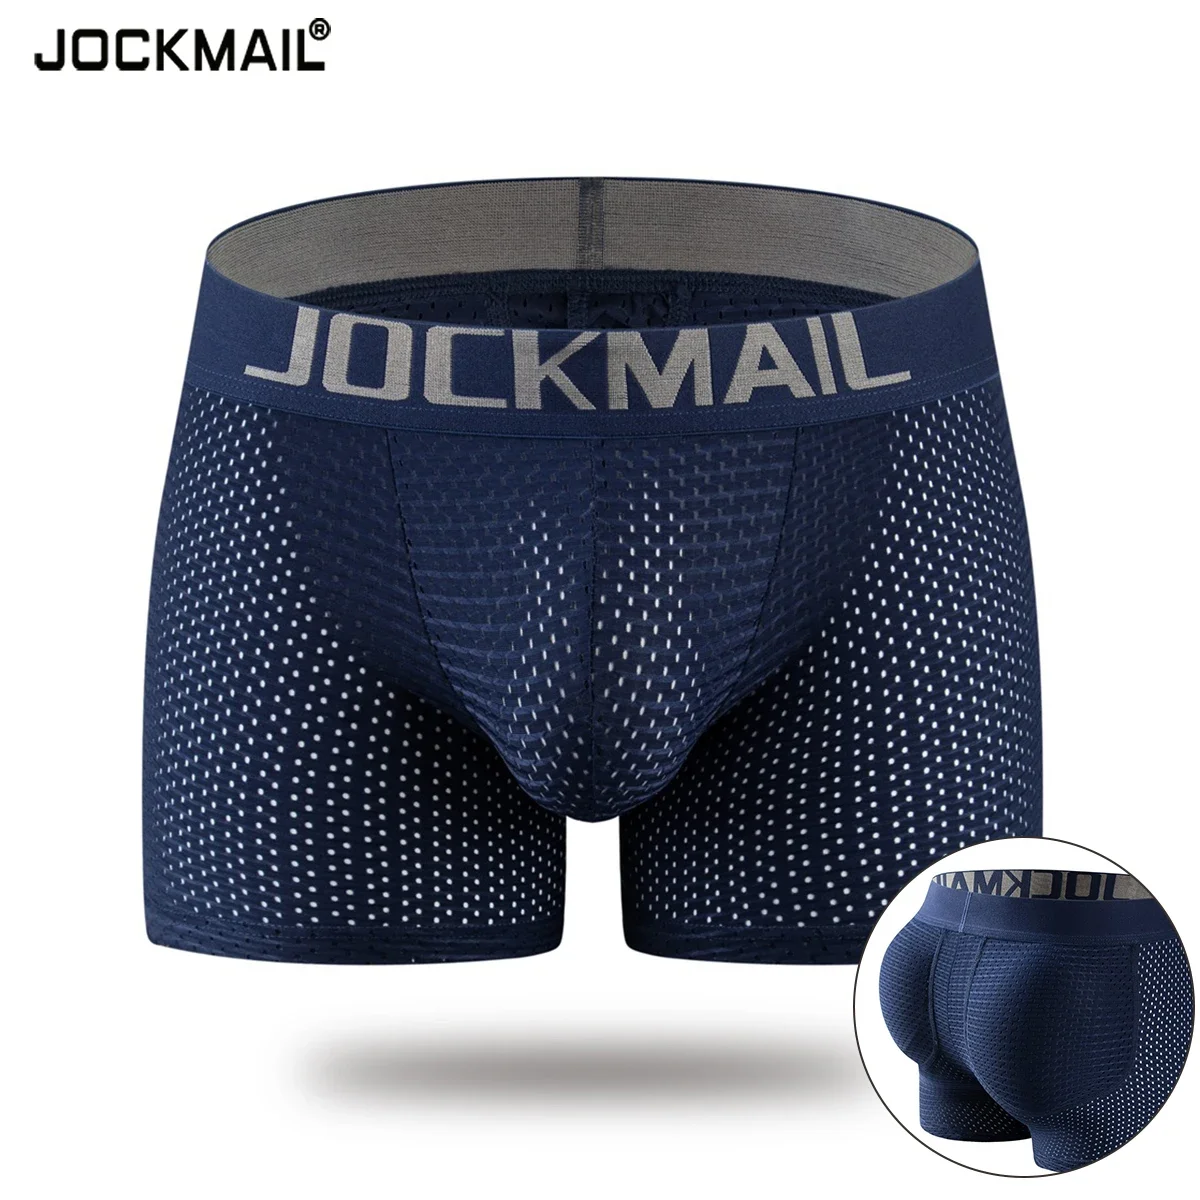 JOCKMAIL Sexy Underwear Men's Boxer Shorts Mesh U Pouch Sexy Underpants with Hip Pads Cueca Boxer Men Sleep Bottoms Male Trunks sexy underwear men briefs sexy men panties men s underpants exotic breathable seamless mesh shorts gay underpants